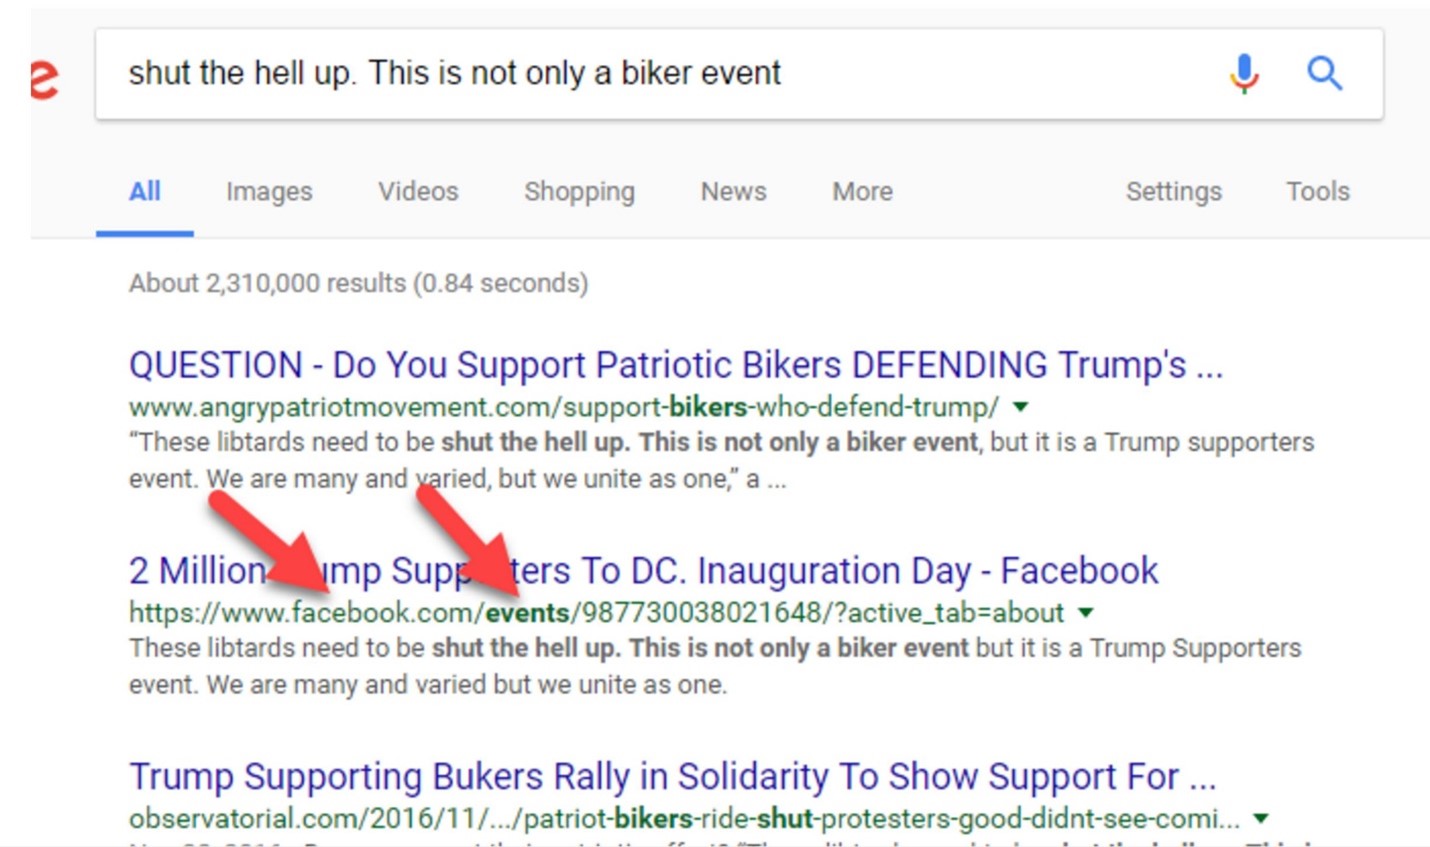 The Google search results for “shut the hell up. This is not only a biker event.” The second result (which the screenshot calls attention to) has a web address on Facebook and is in the subdirectory of “events.”